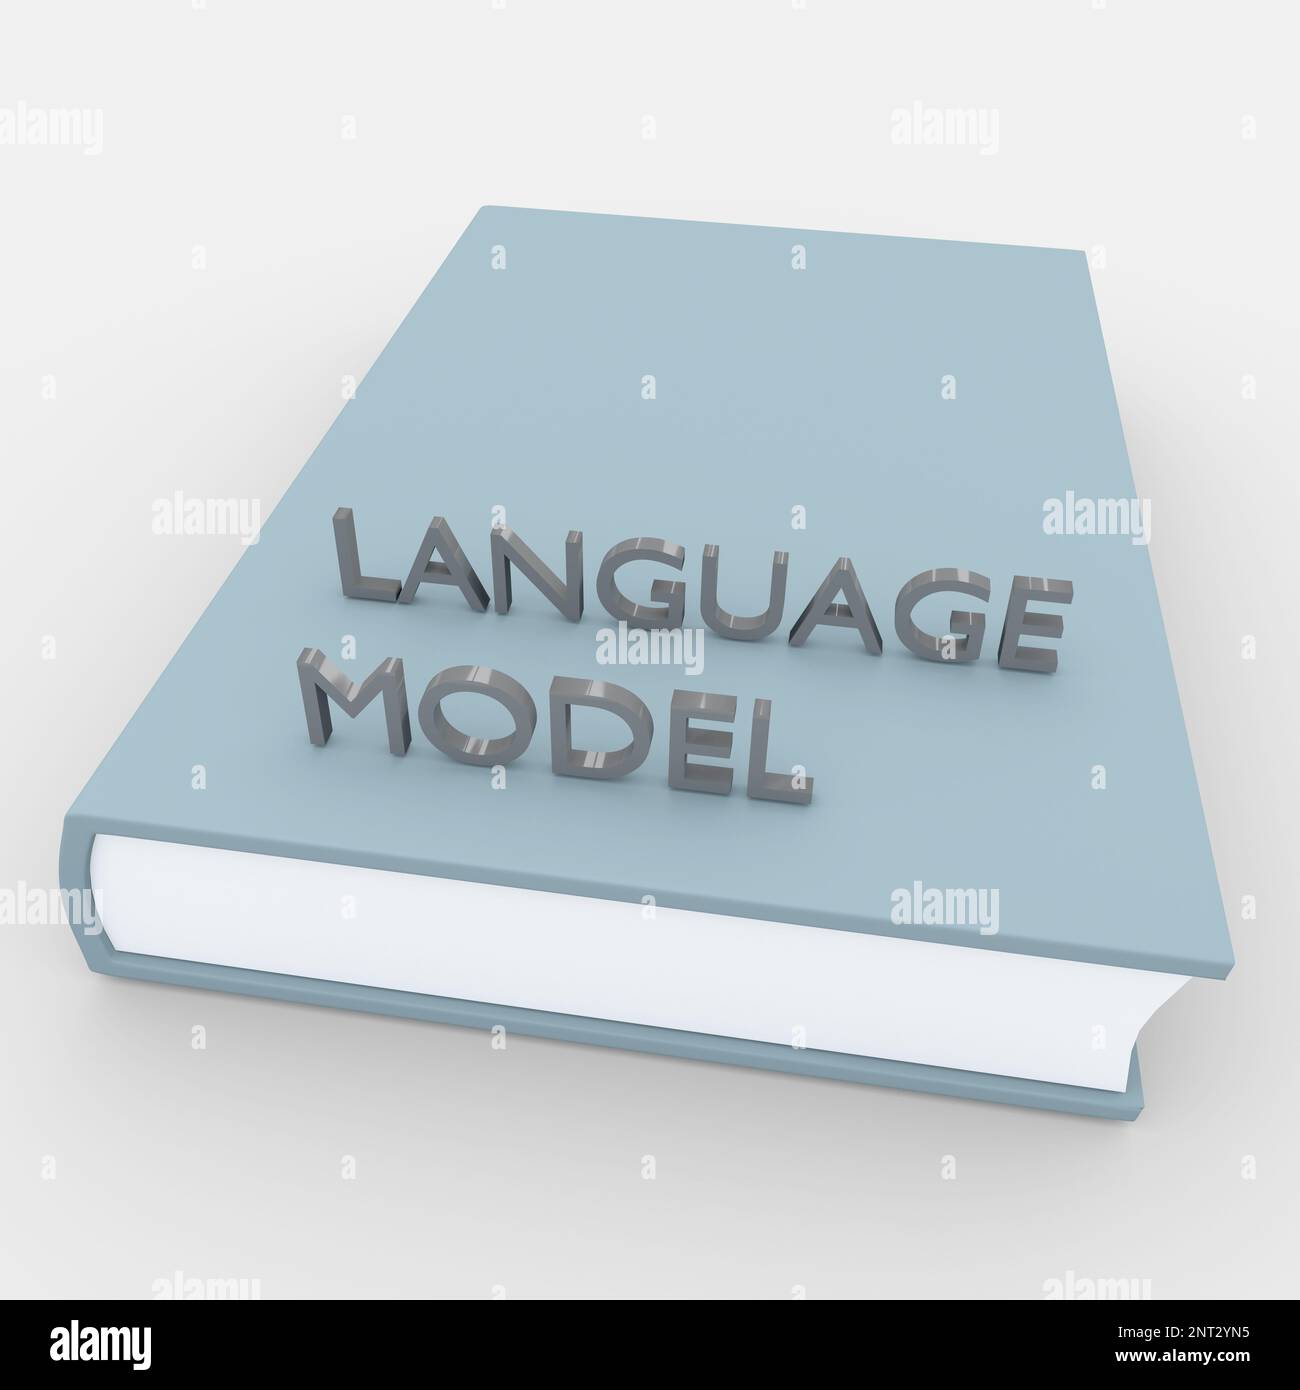 3D illustration of a pale blue book with three dimensional letters forming the title LANGUAGE MODEL, isolated over pale gray backgrond. Stock Photo